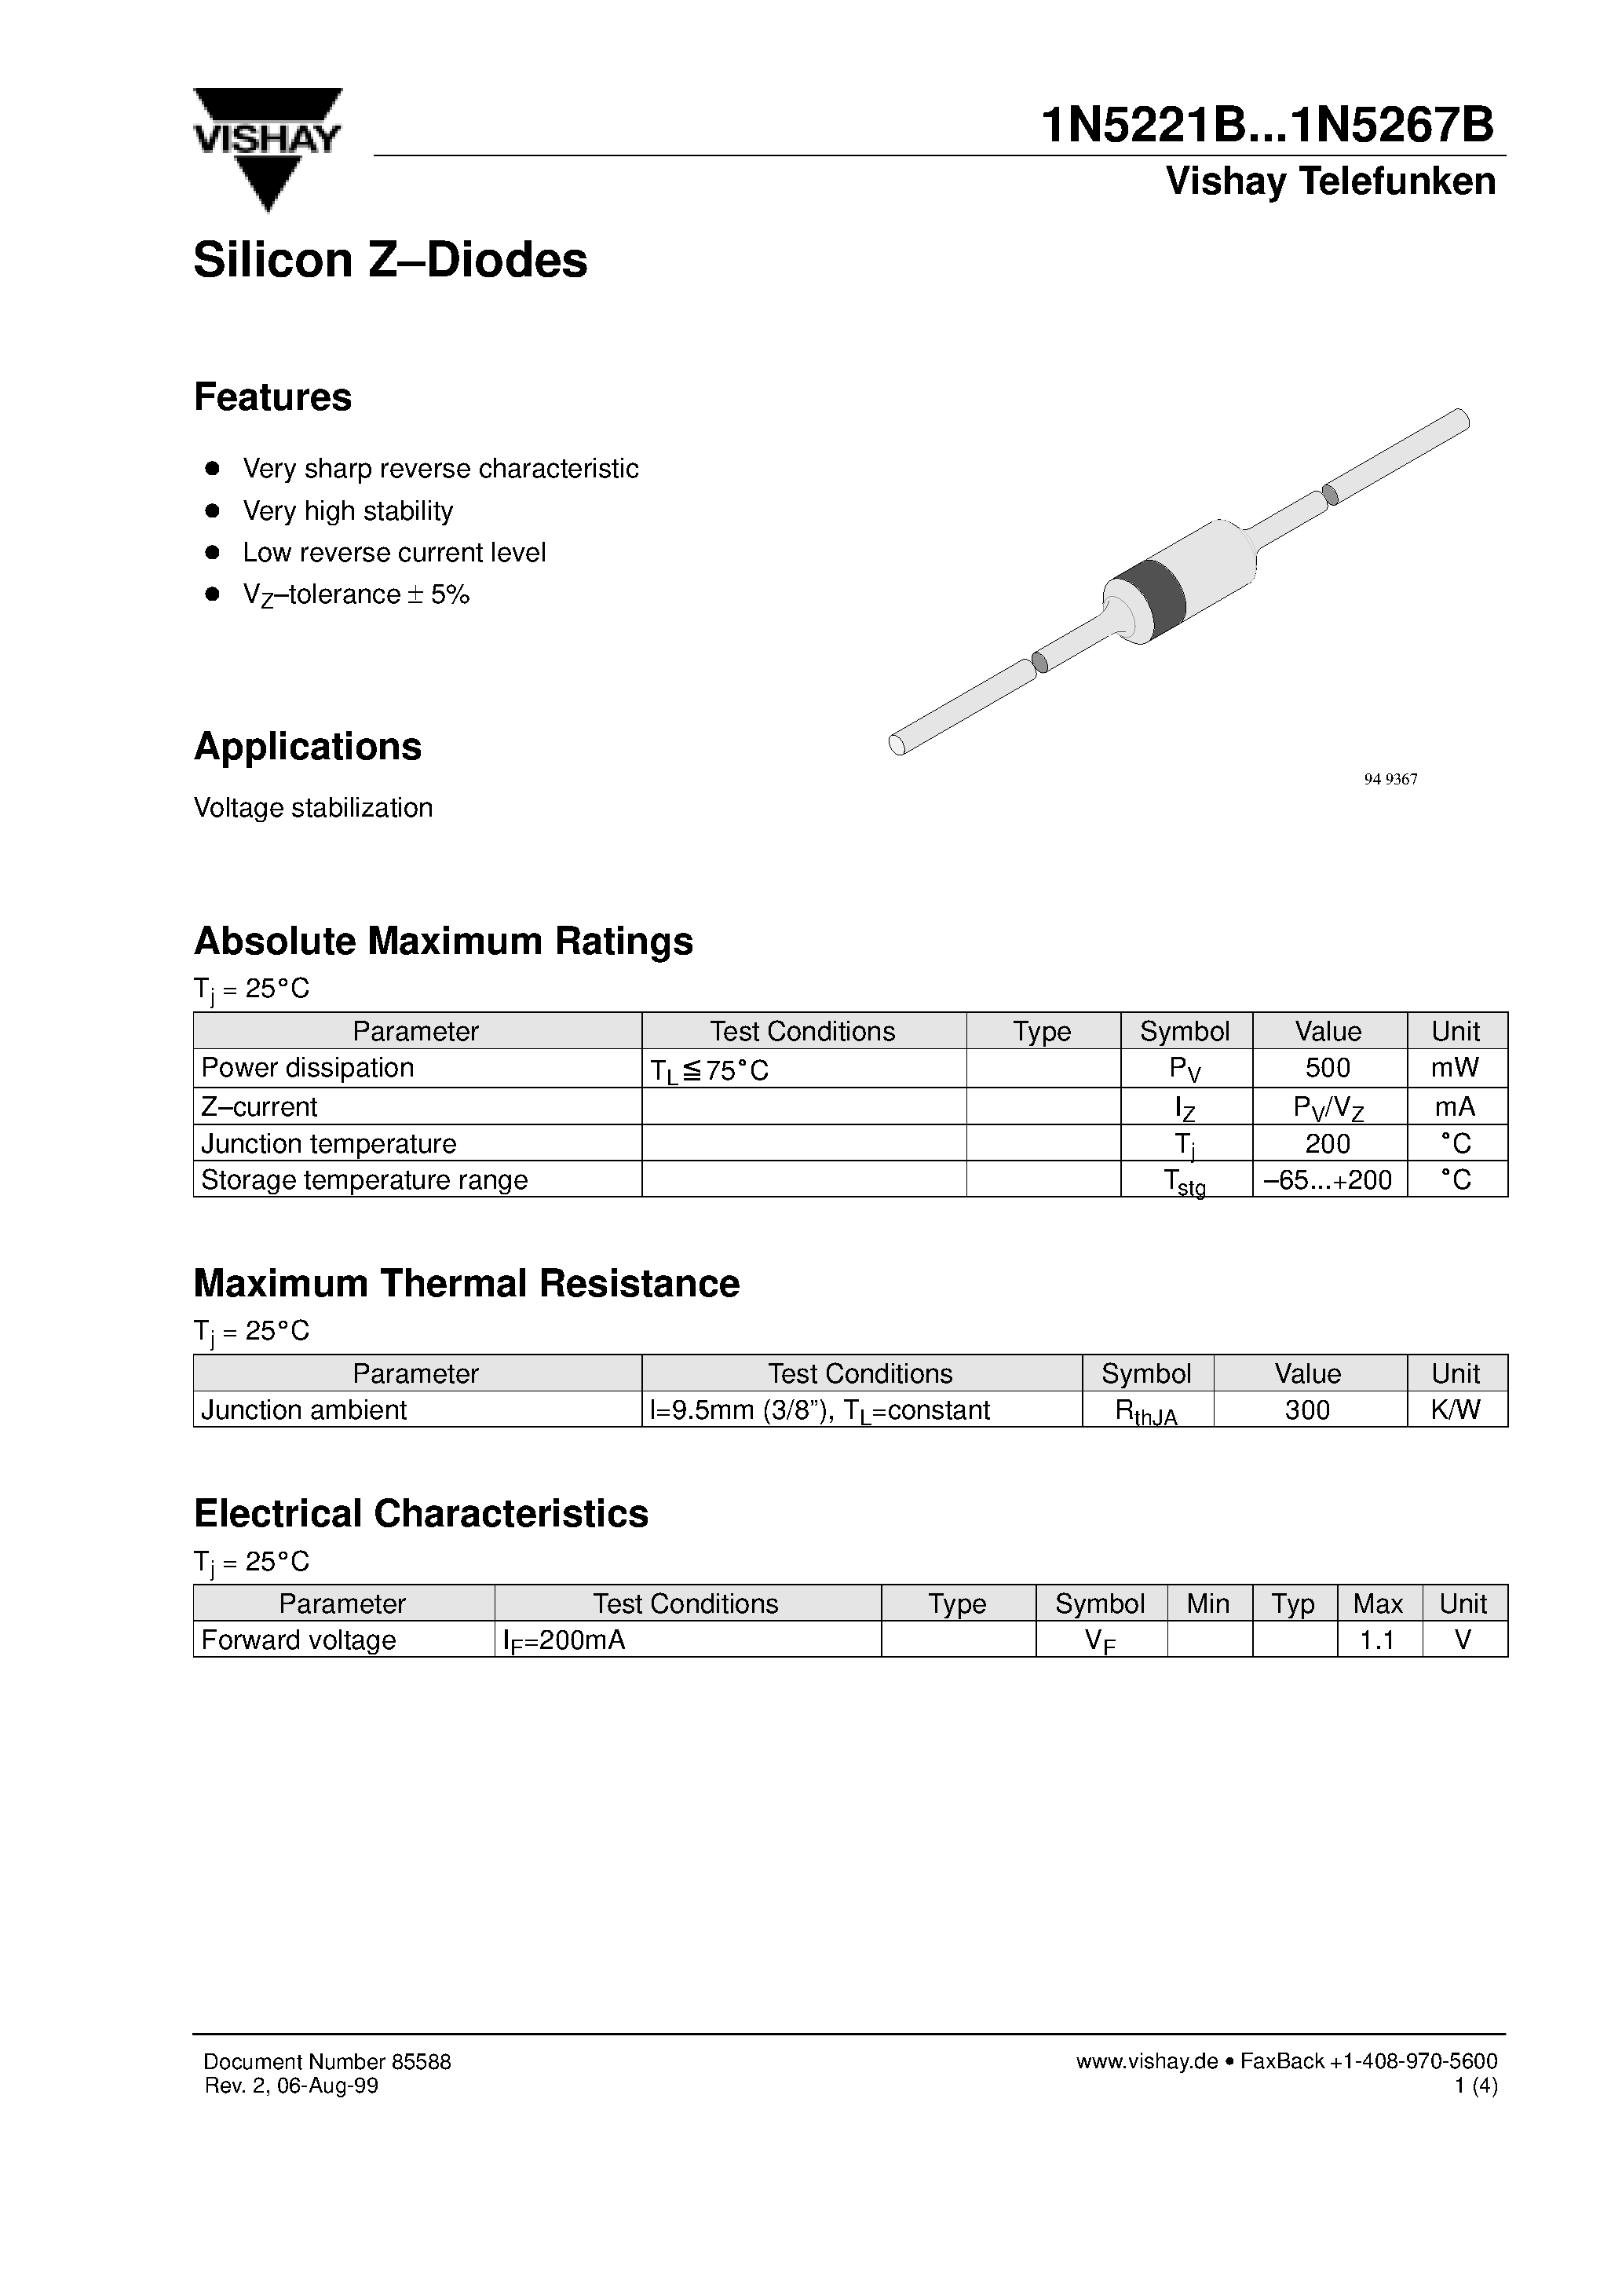 Datasheet 1N5261B - Silicon Z-Diodes page 1